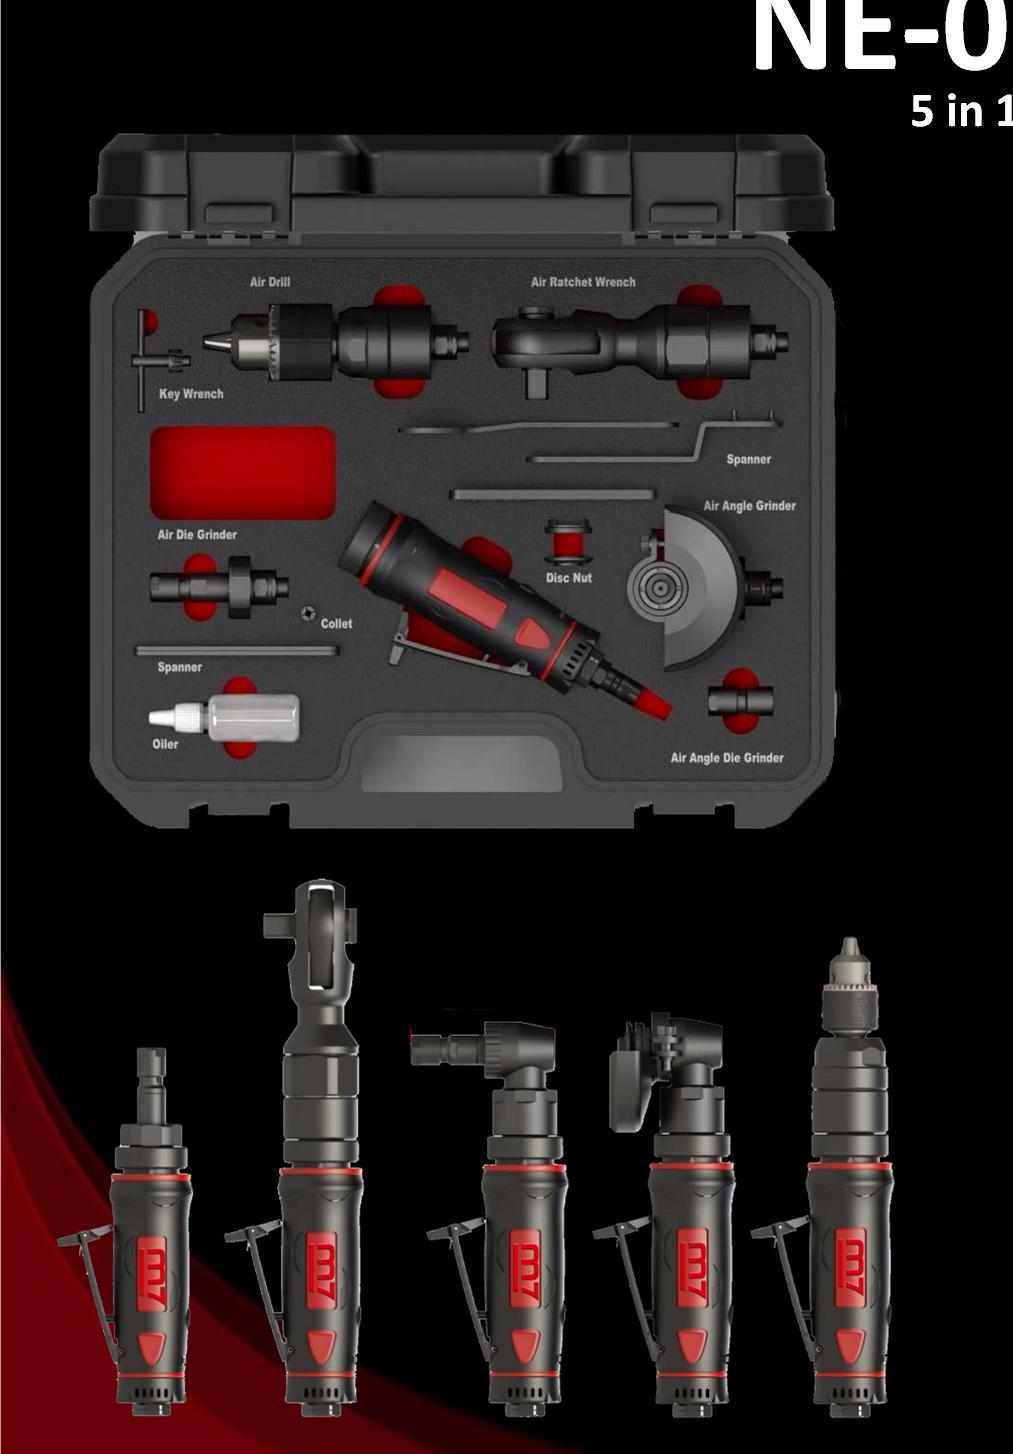 NE 0405 KIT 5 in 1 tool KIT Mighty Seven has done it again to provide the professional tool market with innovative tools! The NE 0405 KIT is a 5 in1 tool kit that comes with a 3/8 Drill, 1/2 Dr.